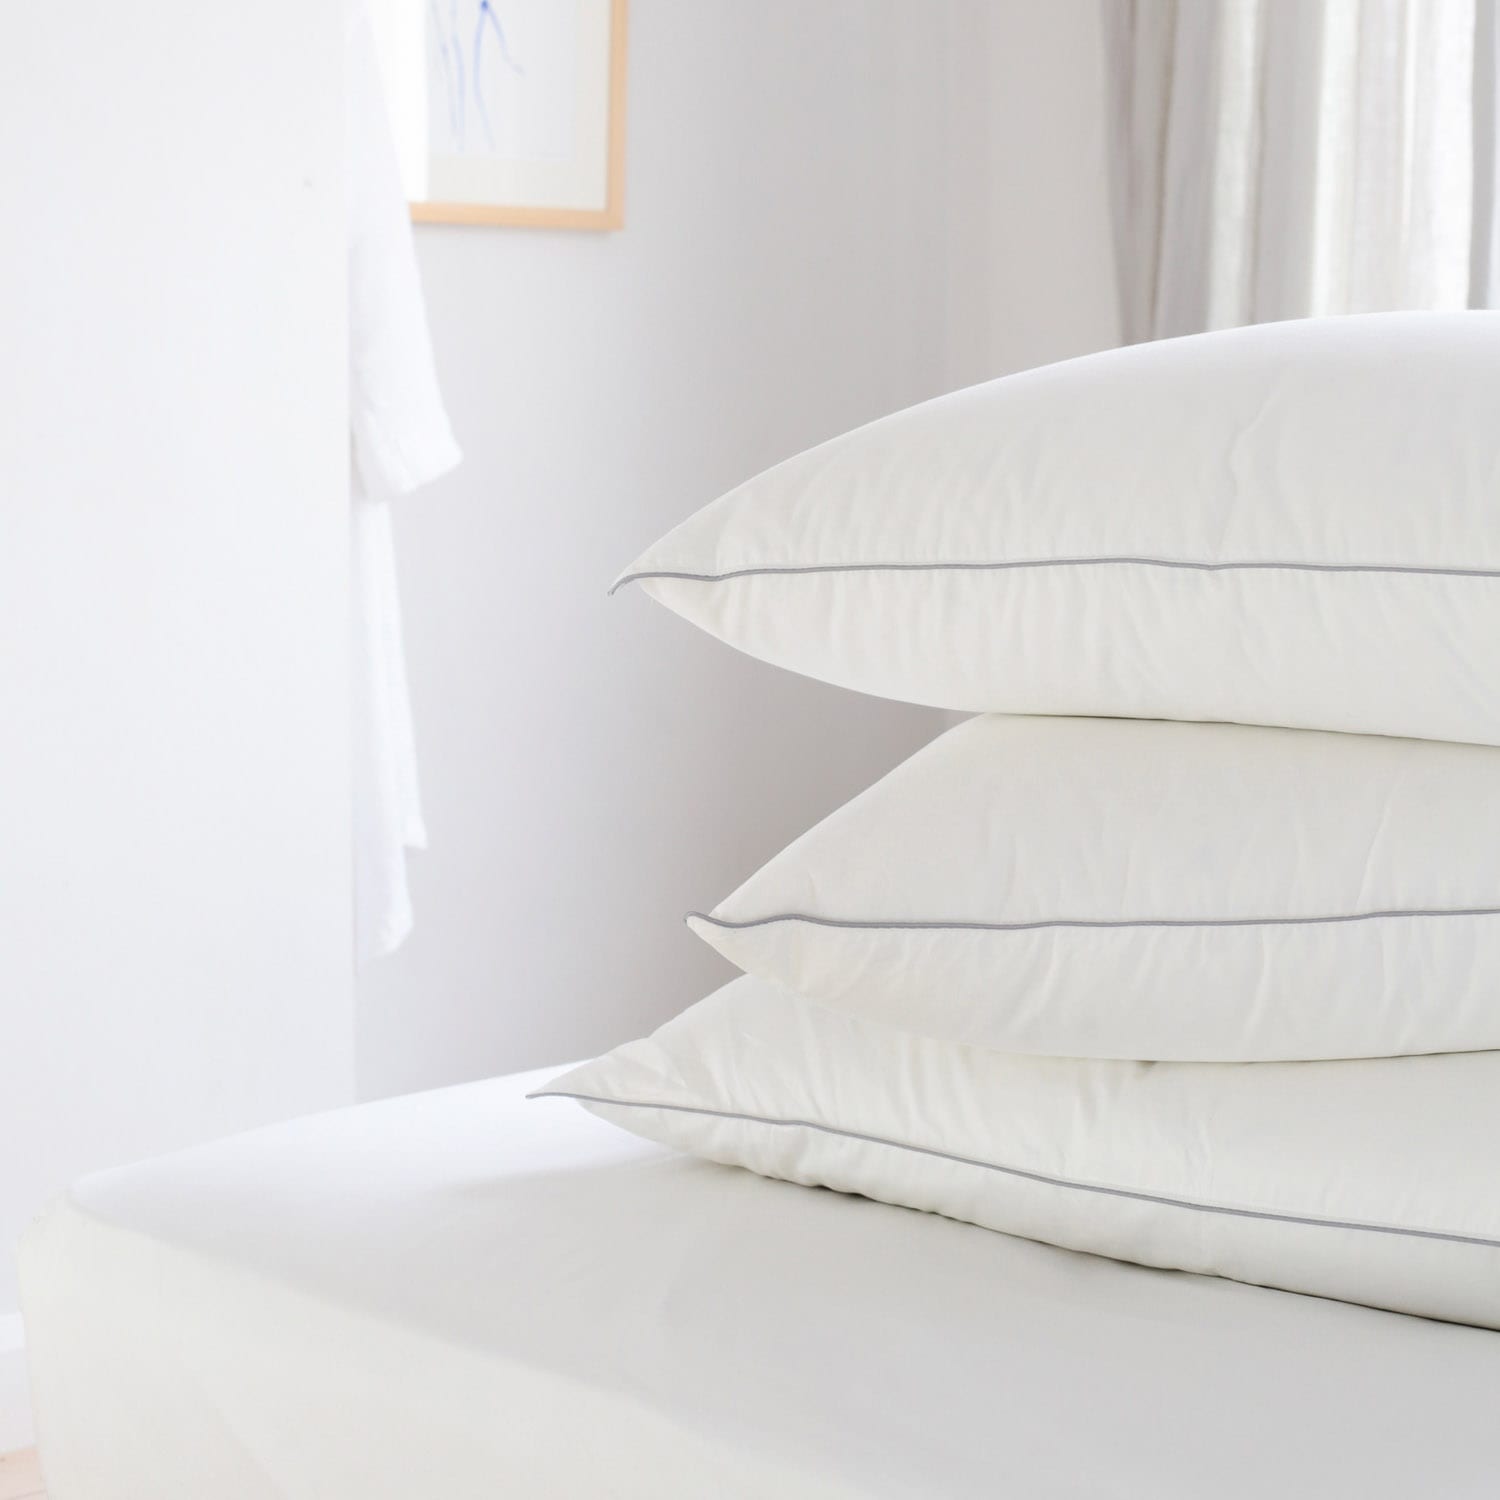 Pile of 3 Hungarian goose down pillows in a white bedroom